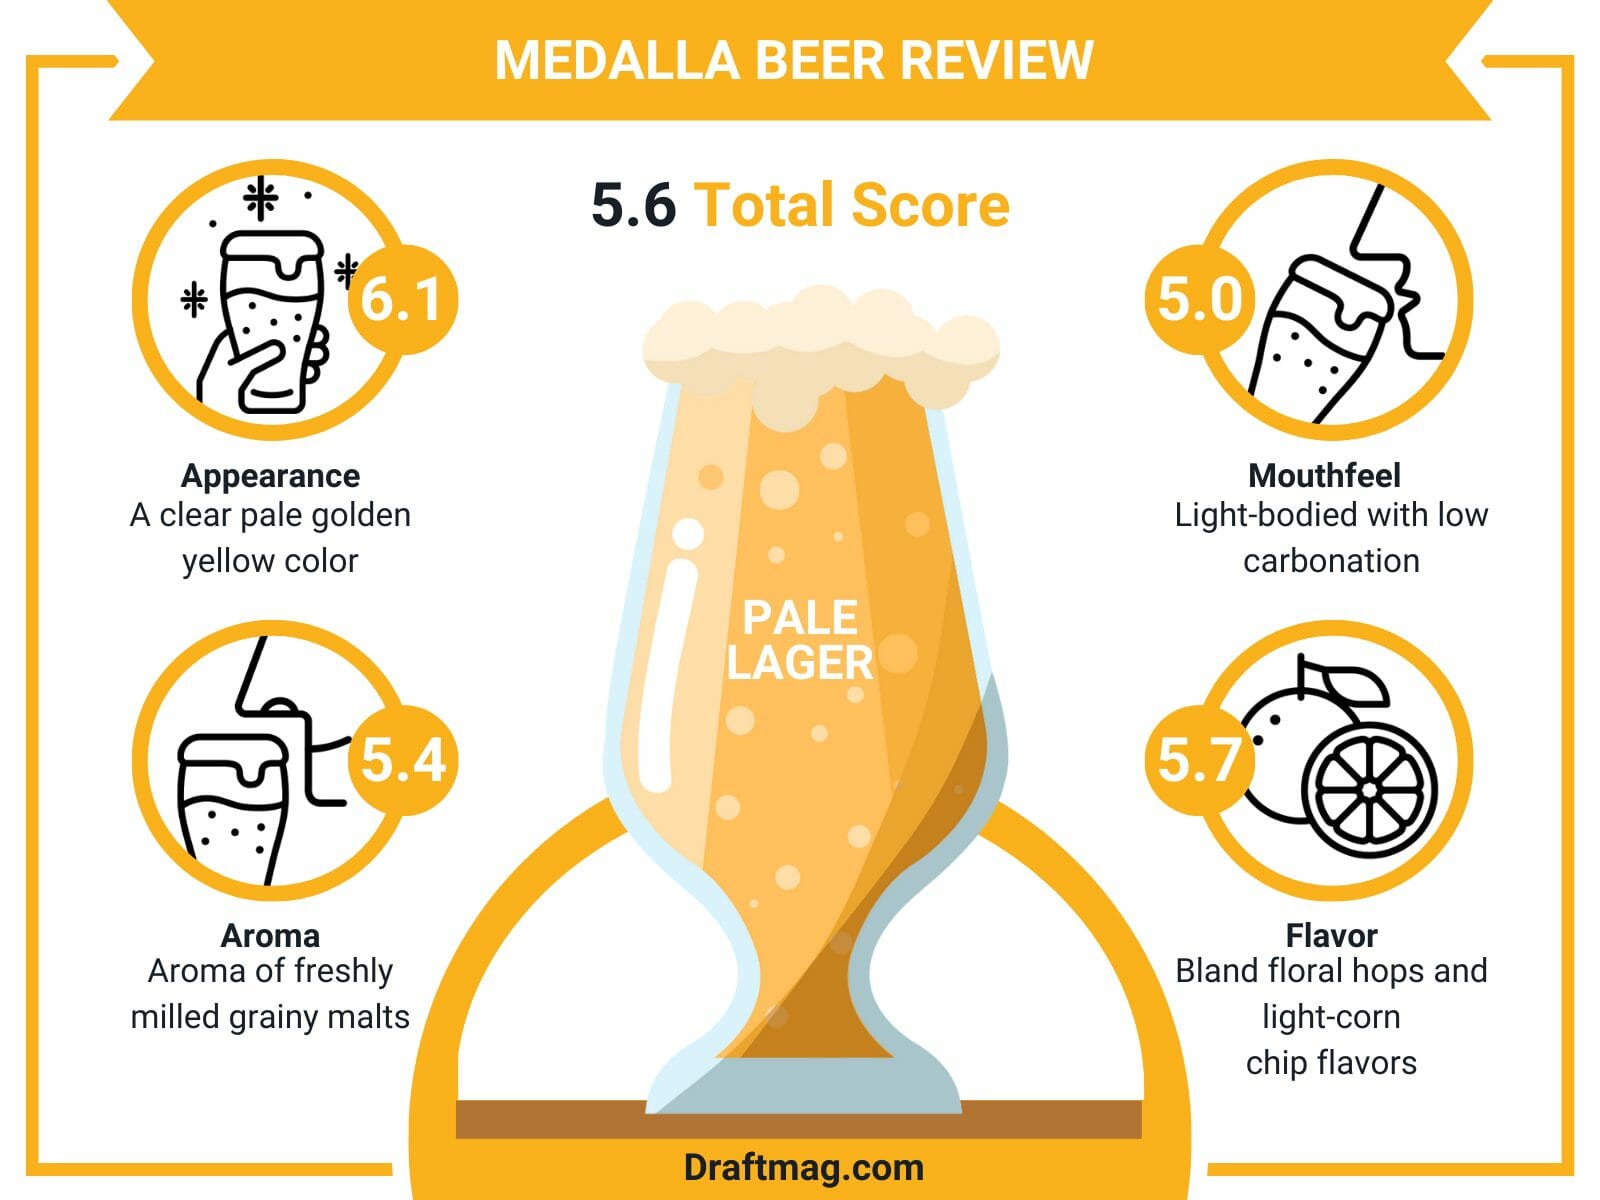 Medalla beer review infographics